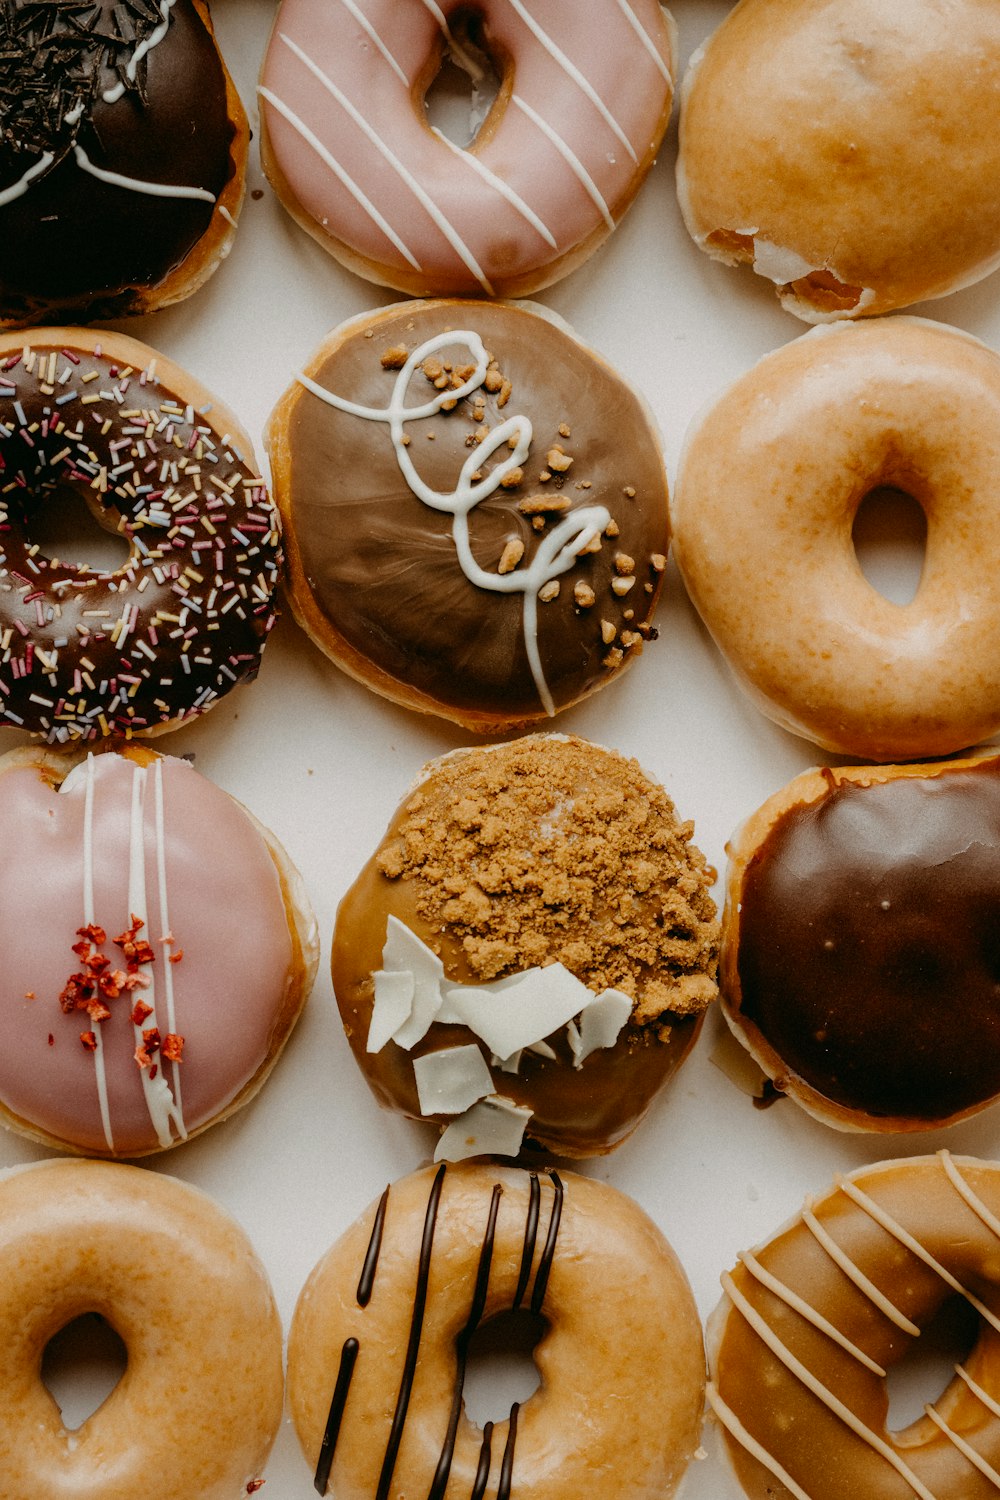 Doughnuts Pictures | Download Free Images on Unsplash